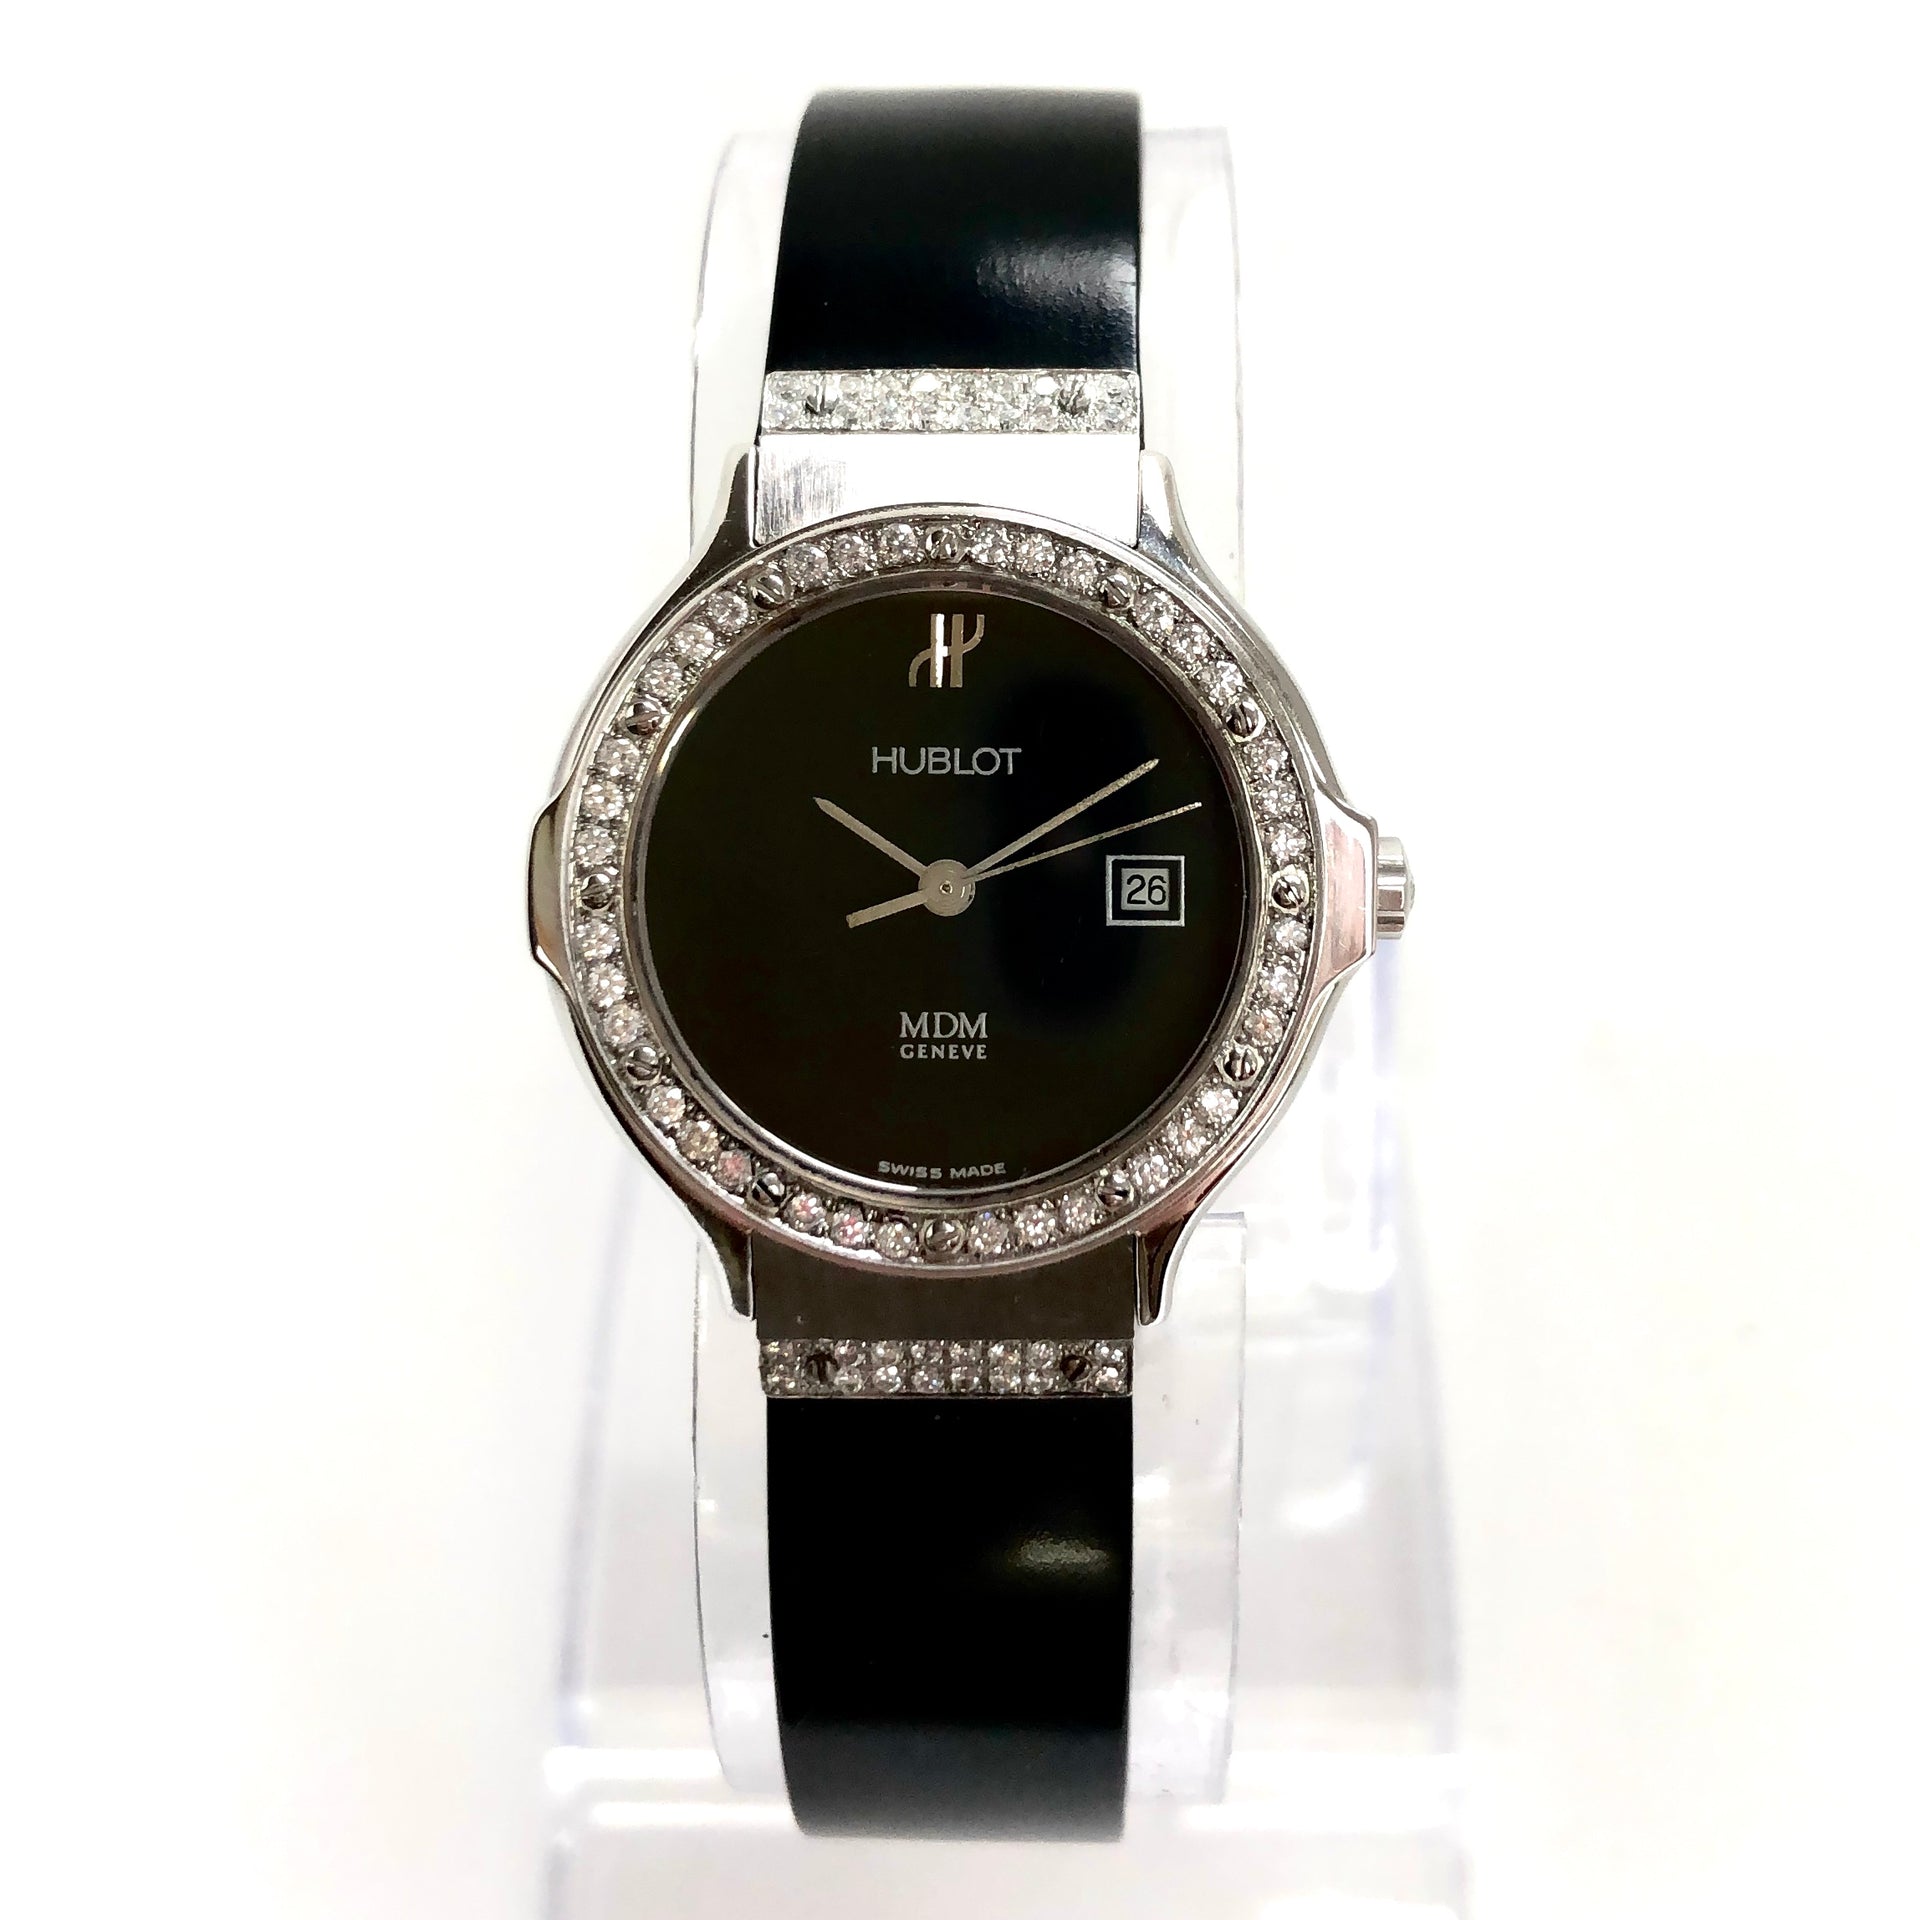 Hublot MDM Couvercle Ladies Covered Flip Top Lid Watch - Stainless